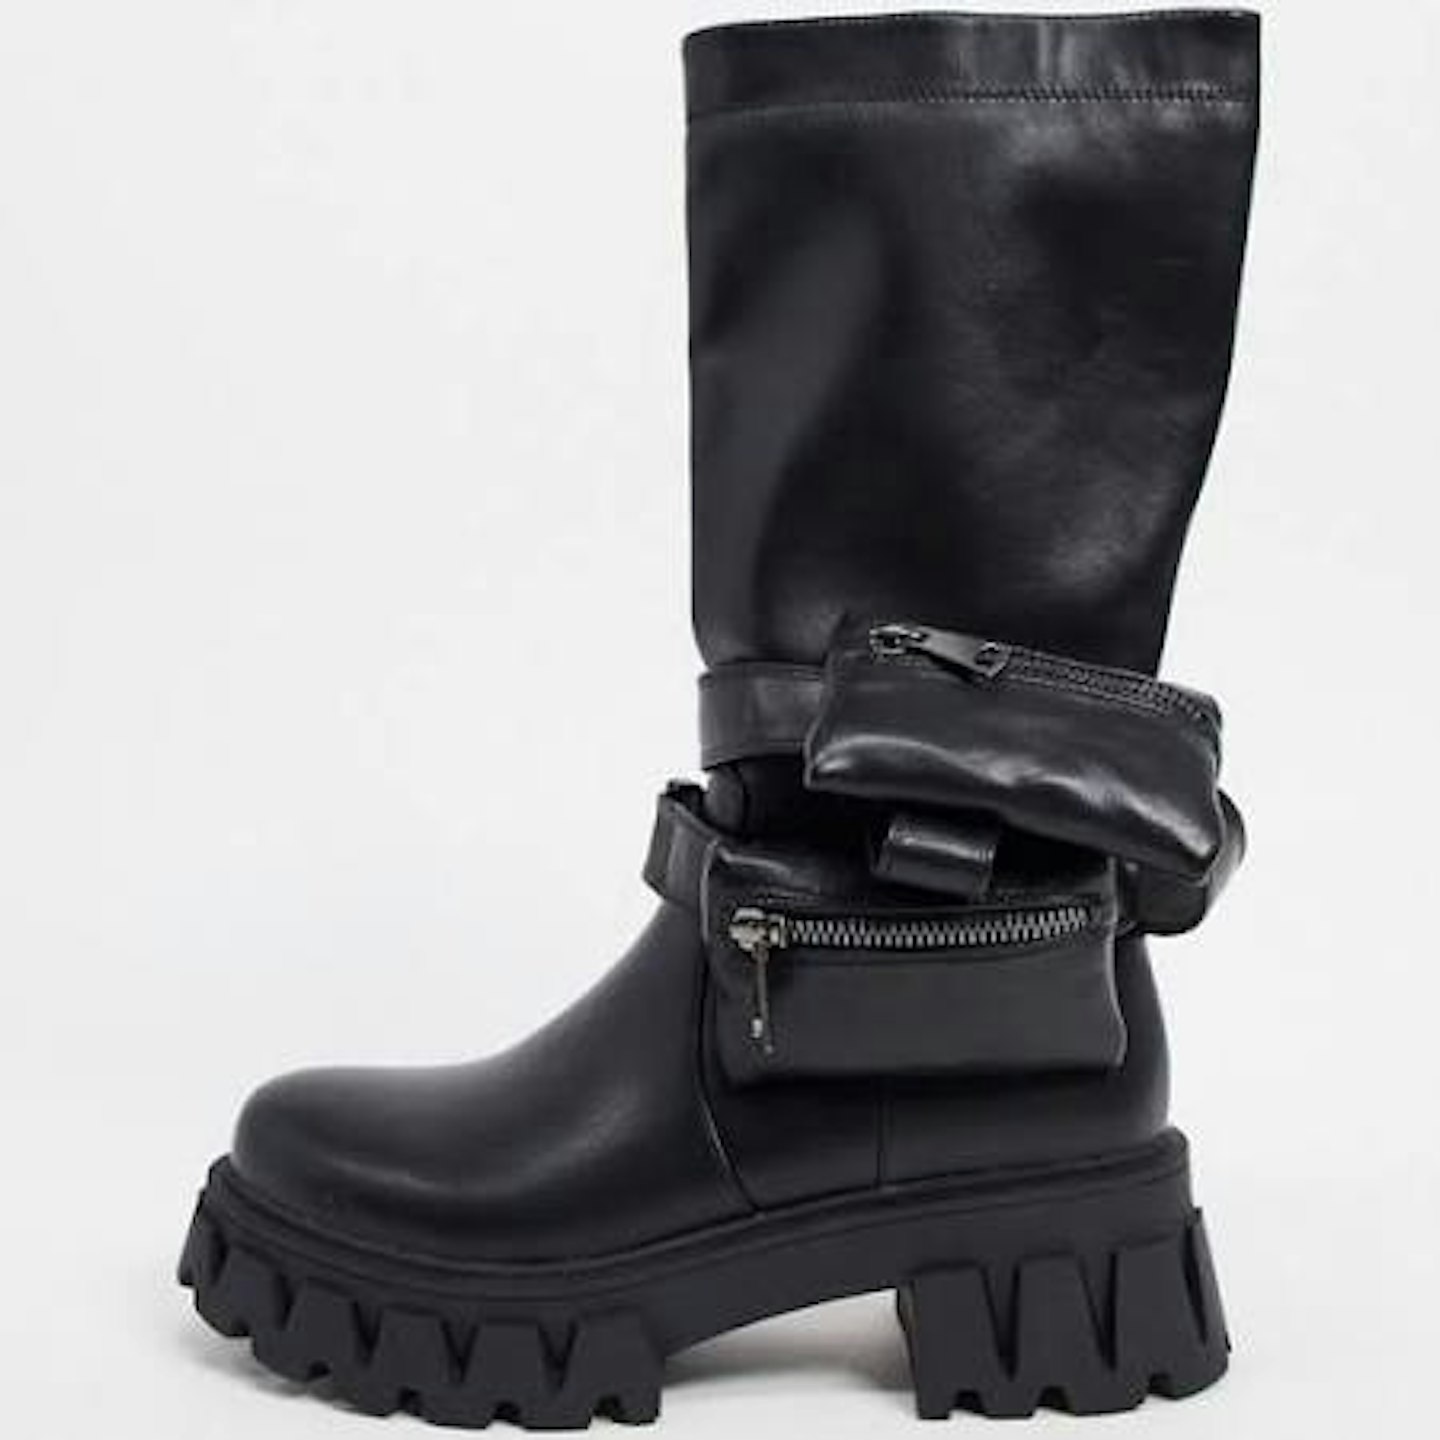 ASOS, Midnight vegan mid calf boots with pouches in black, £90